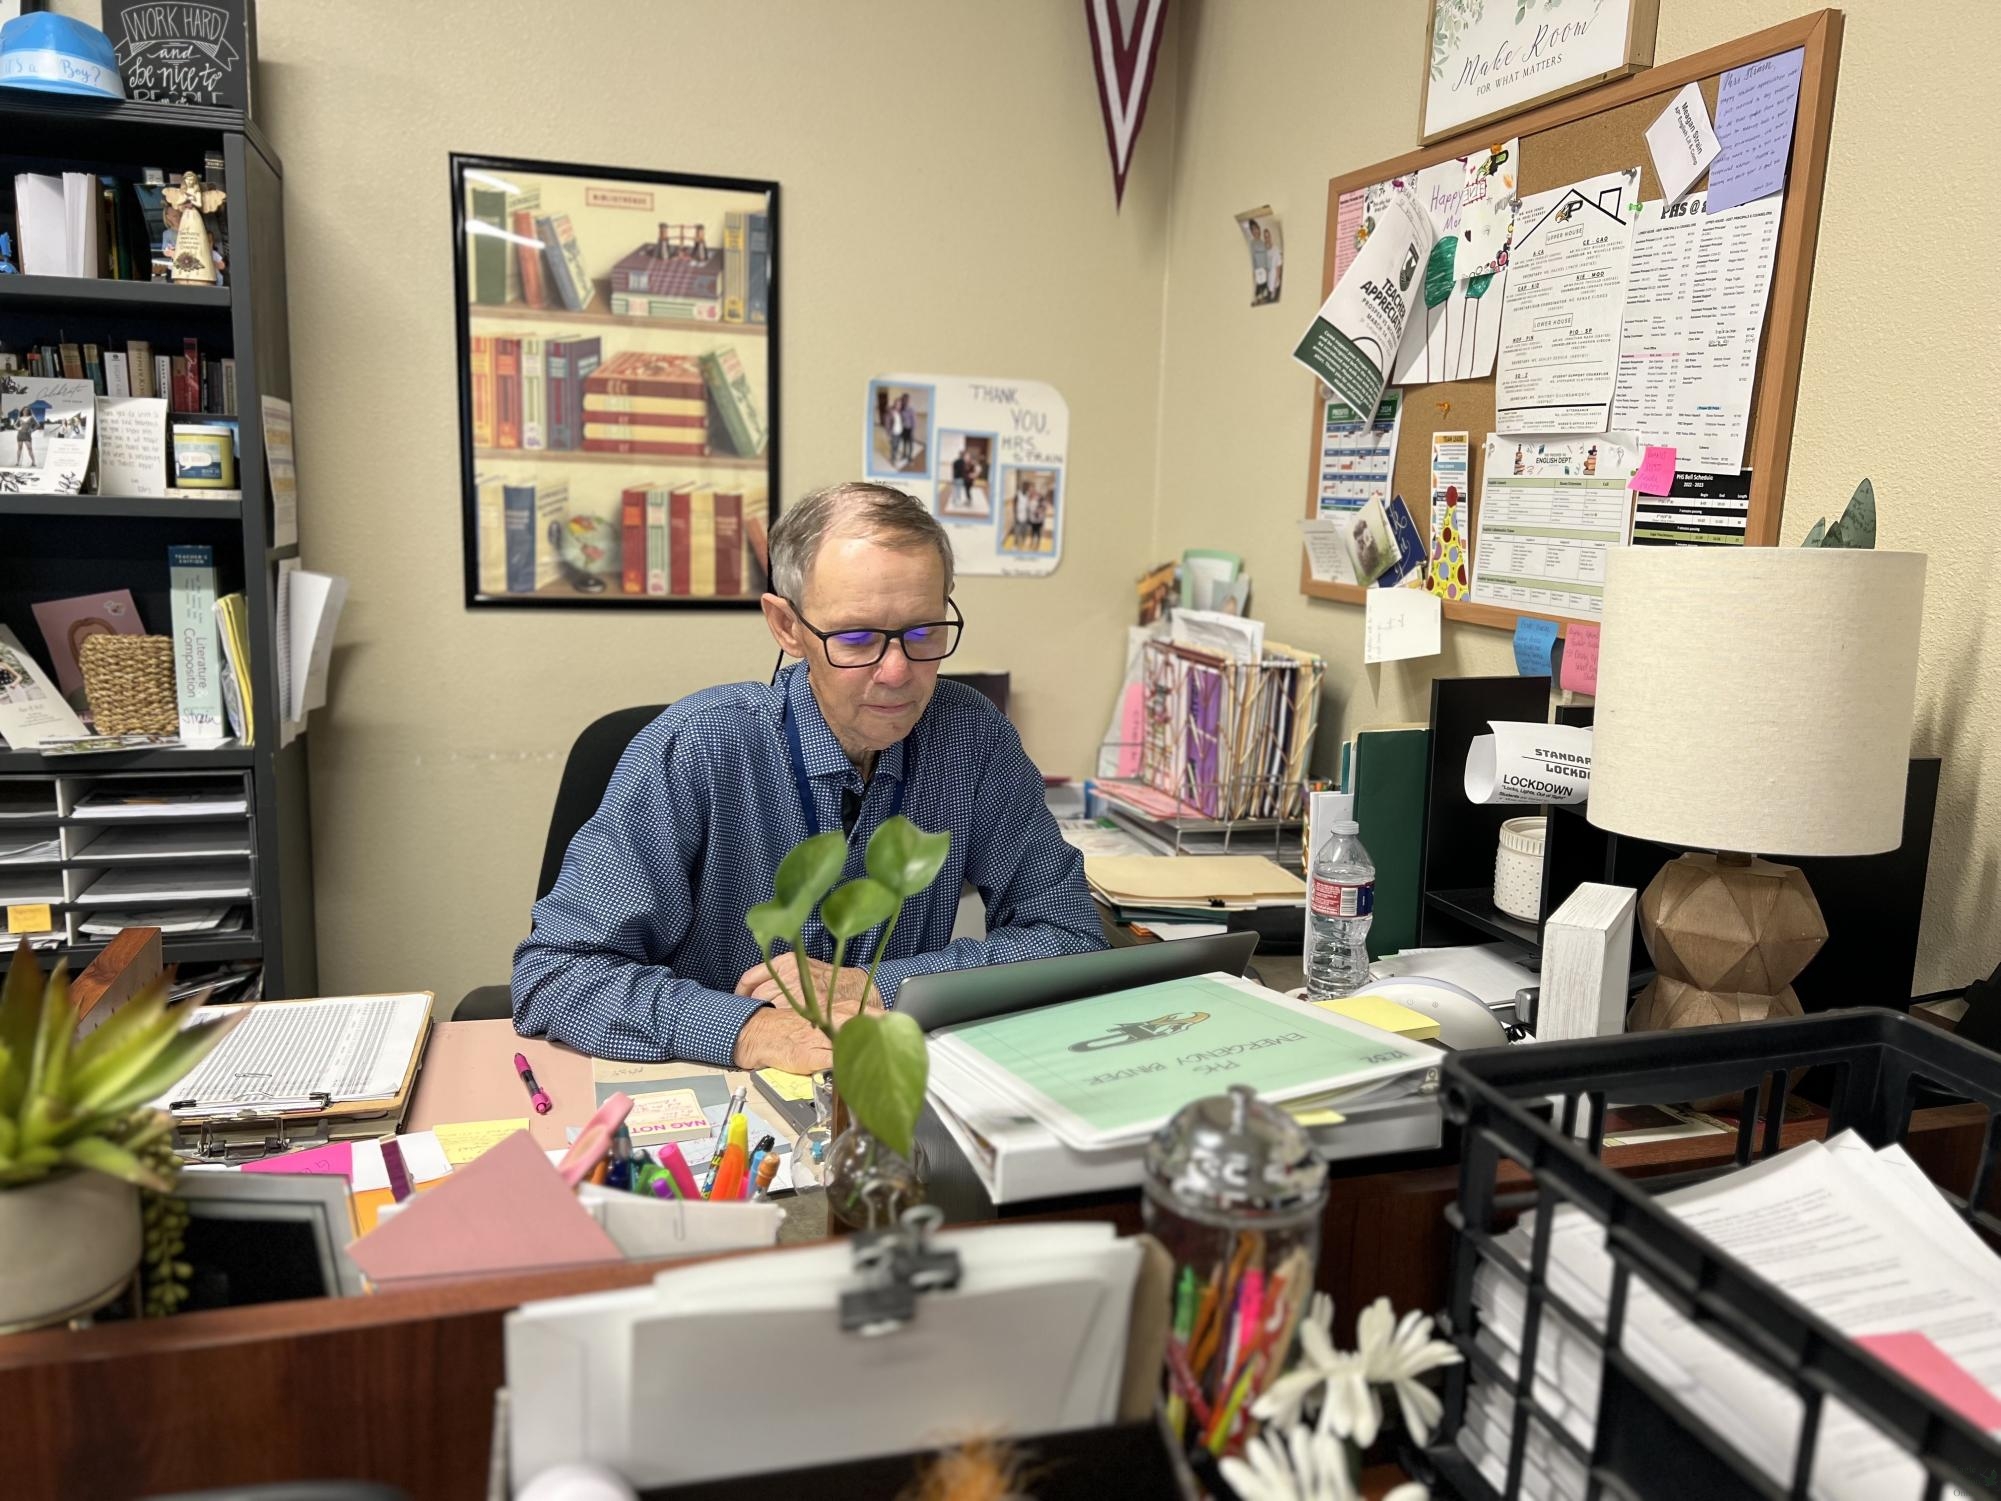 At his desk, long-term substitute Gary Spurgeon works on his computer. PISD hired Spurgeon to substitute for English IV for around three months. In the attached article, Spurgeon shares his story overcoming cancer and returning to his job as a teacher. 